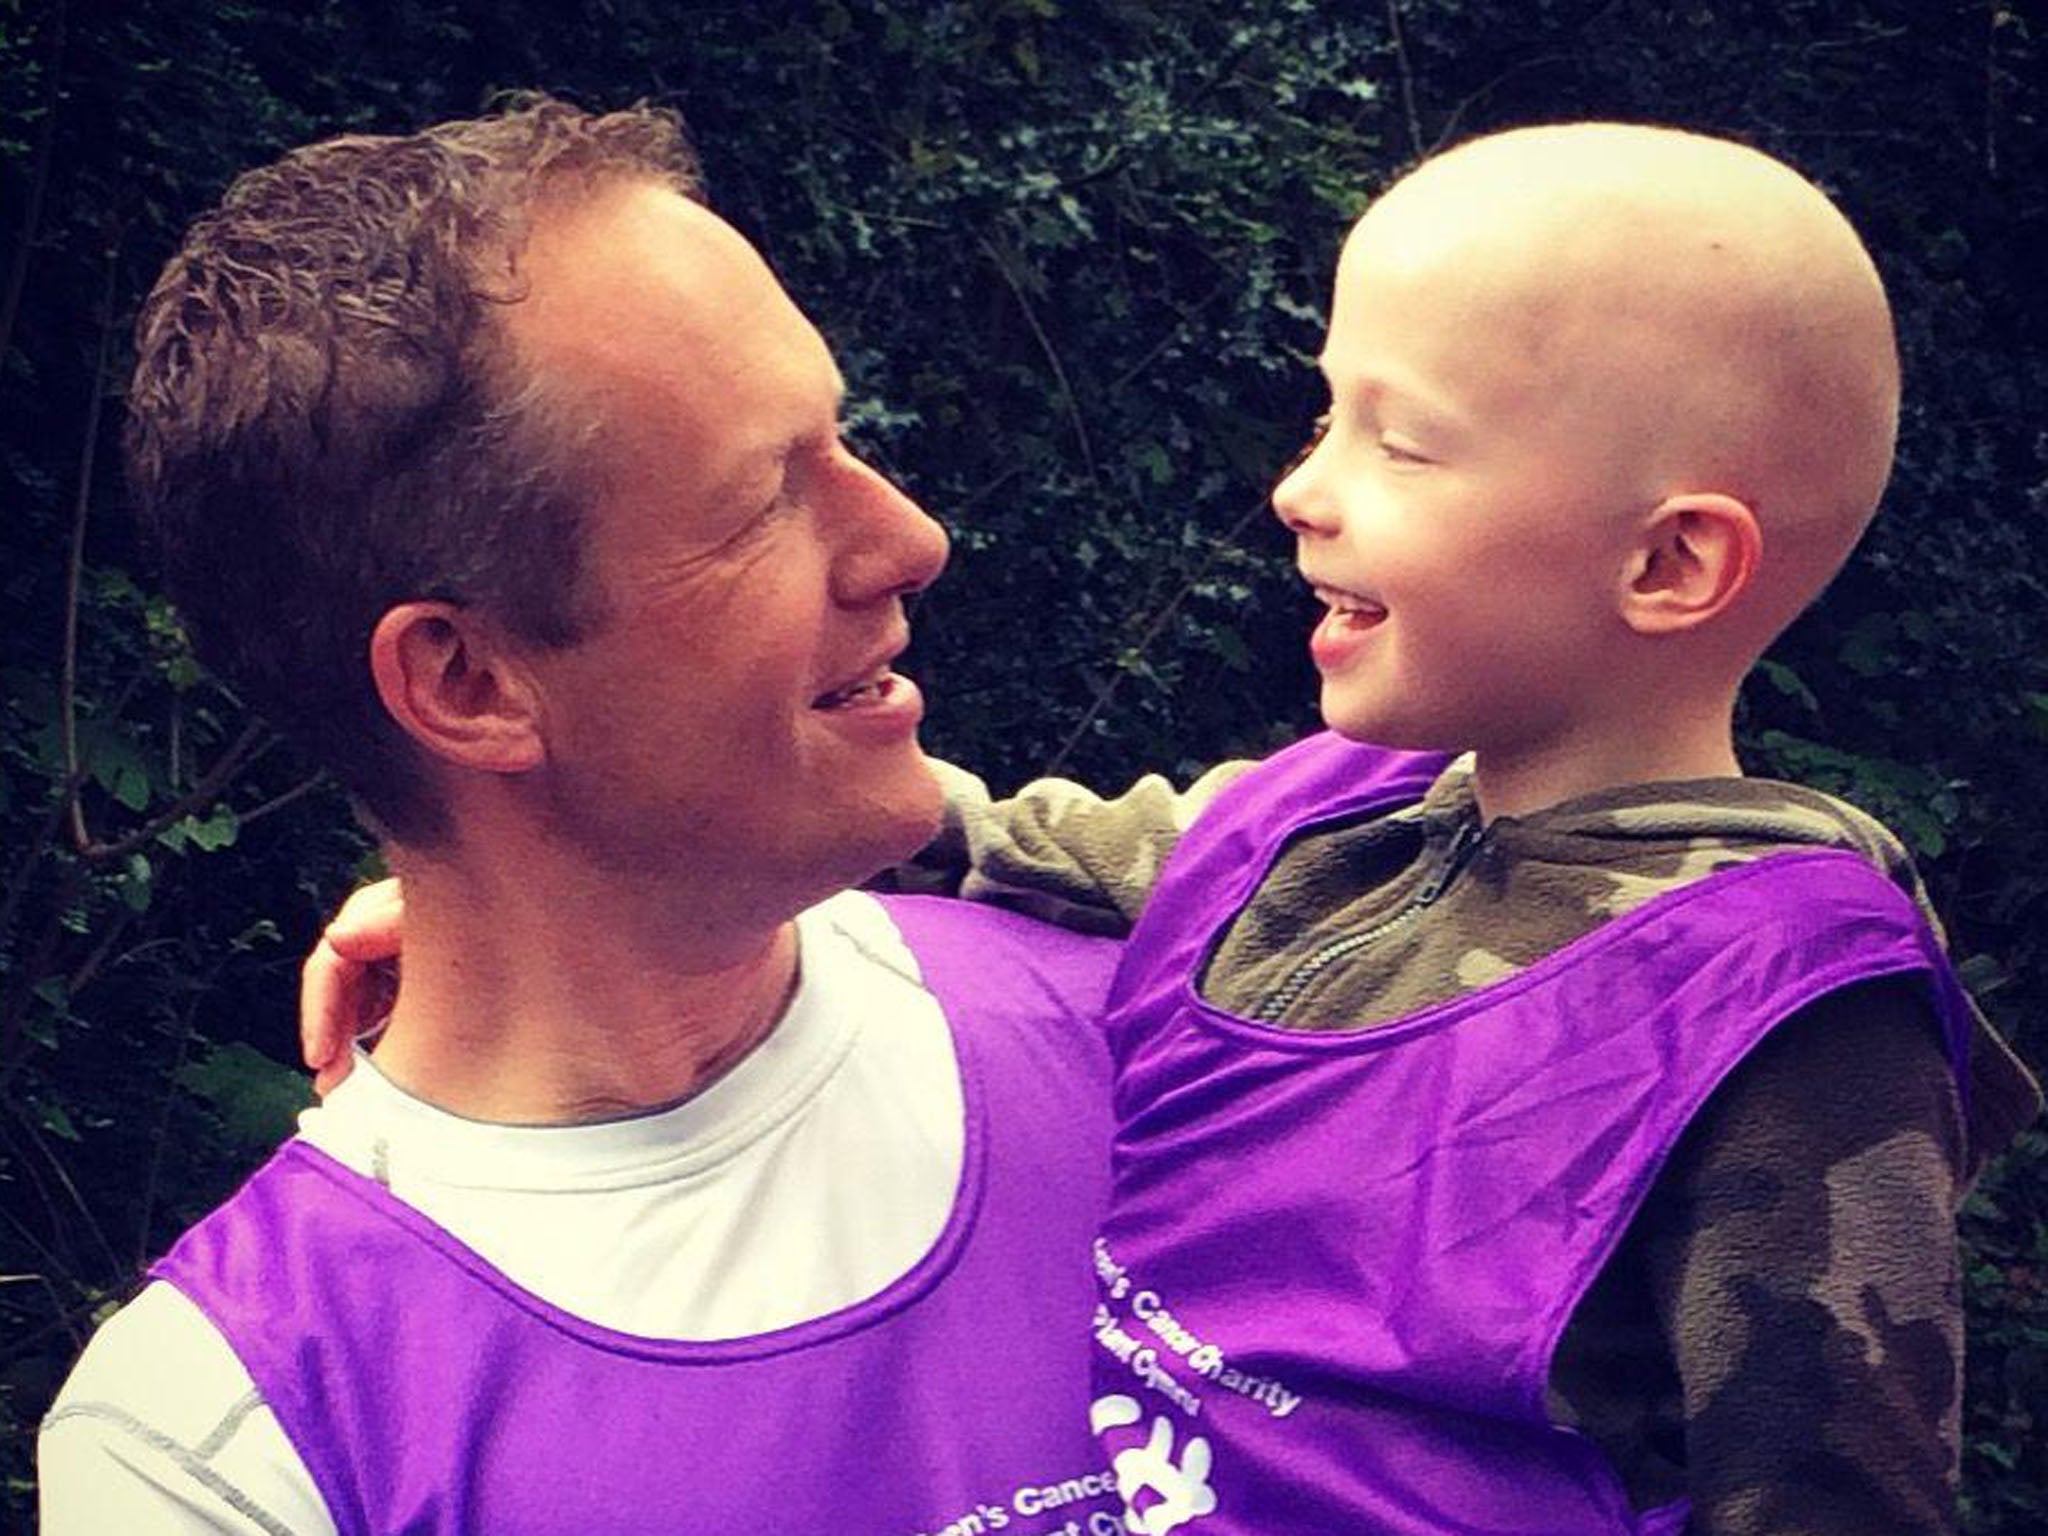 James Rudolf with his son, Oscar, who was diagnosed with cancer last year.